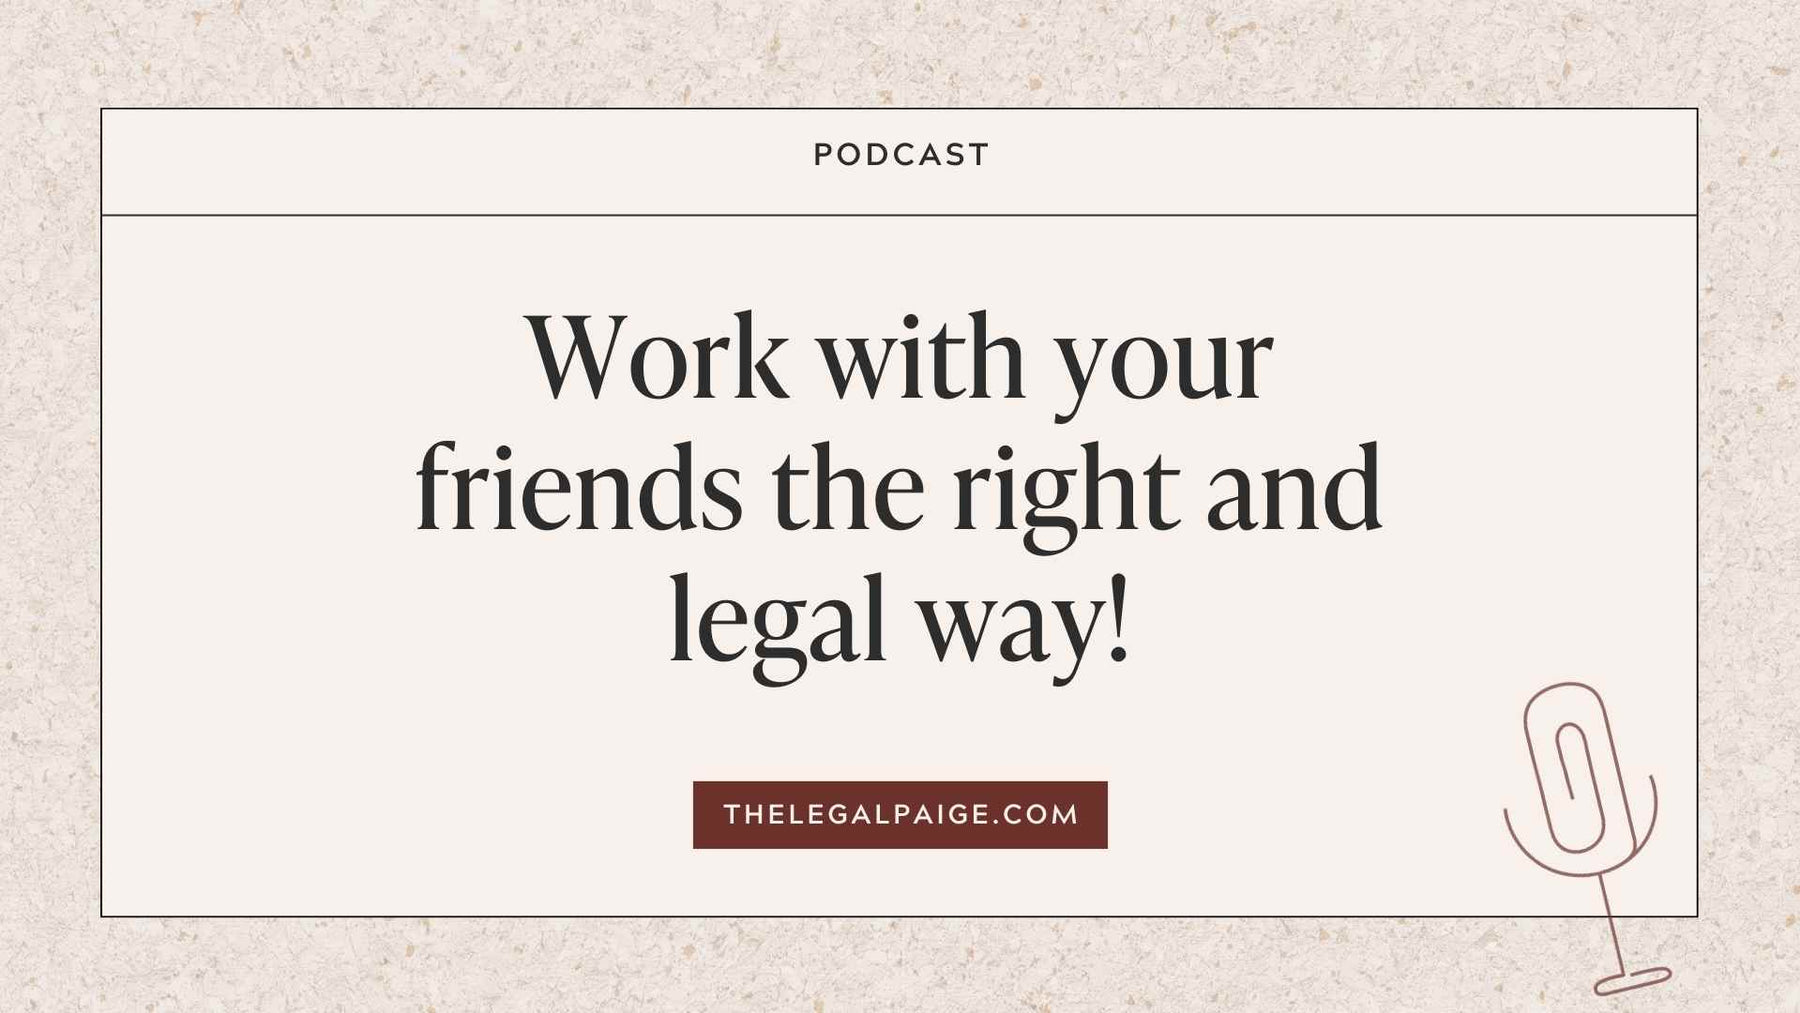 Work with your friends the right and legal way!